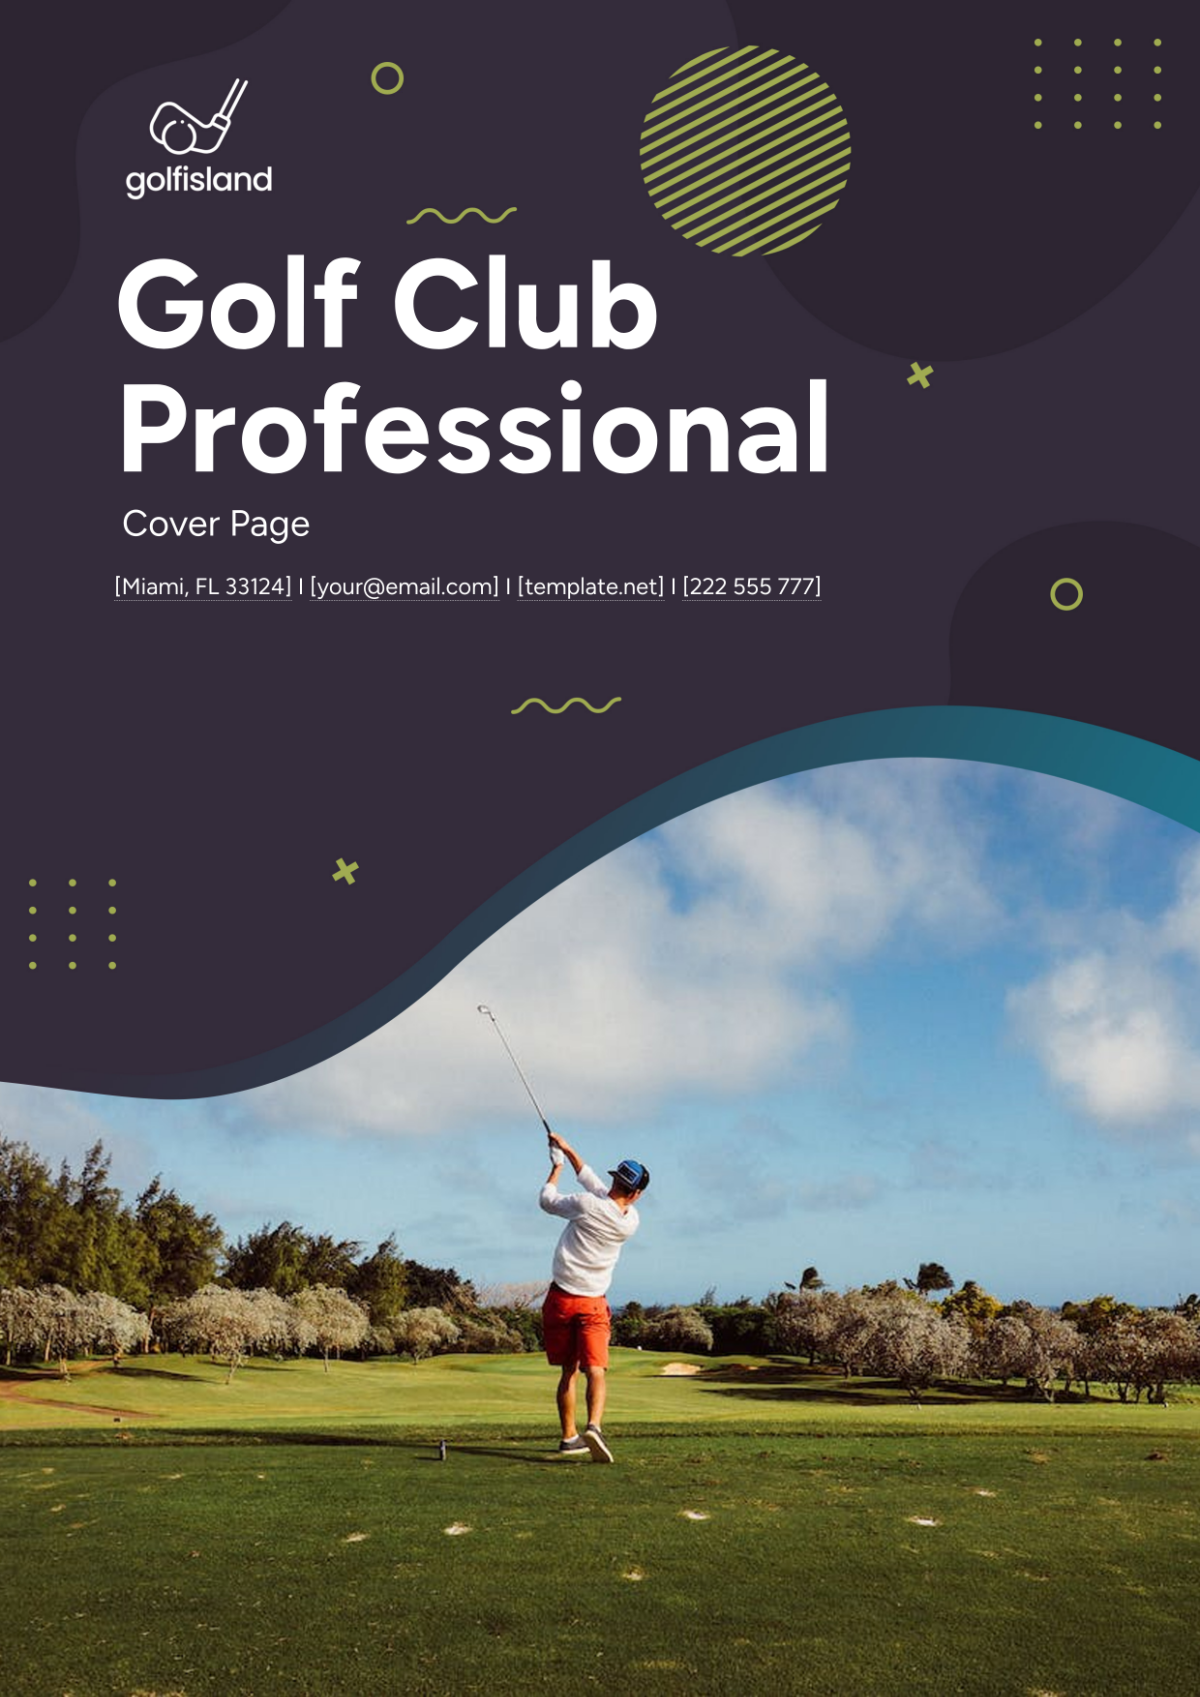 Golf Club Professional Cover Page